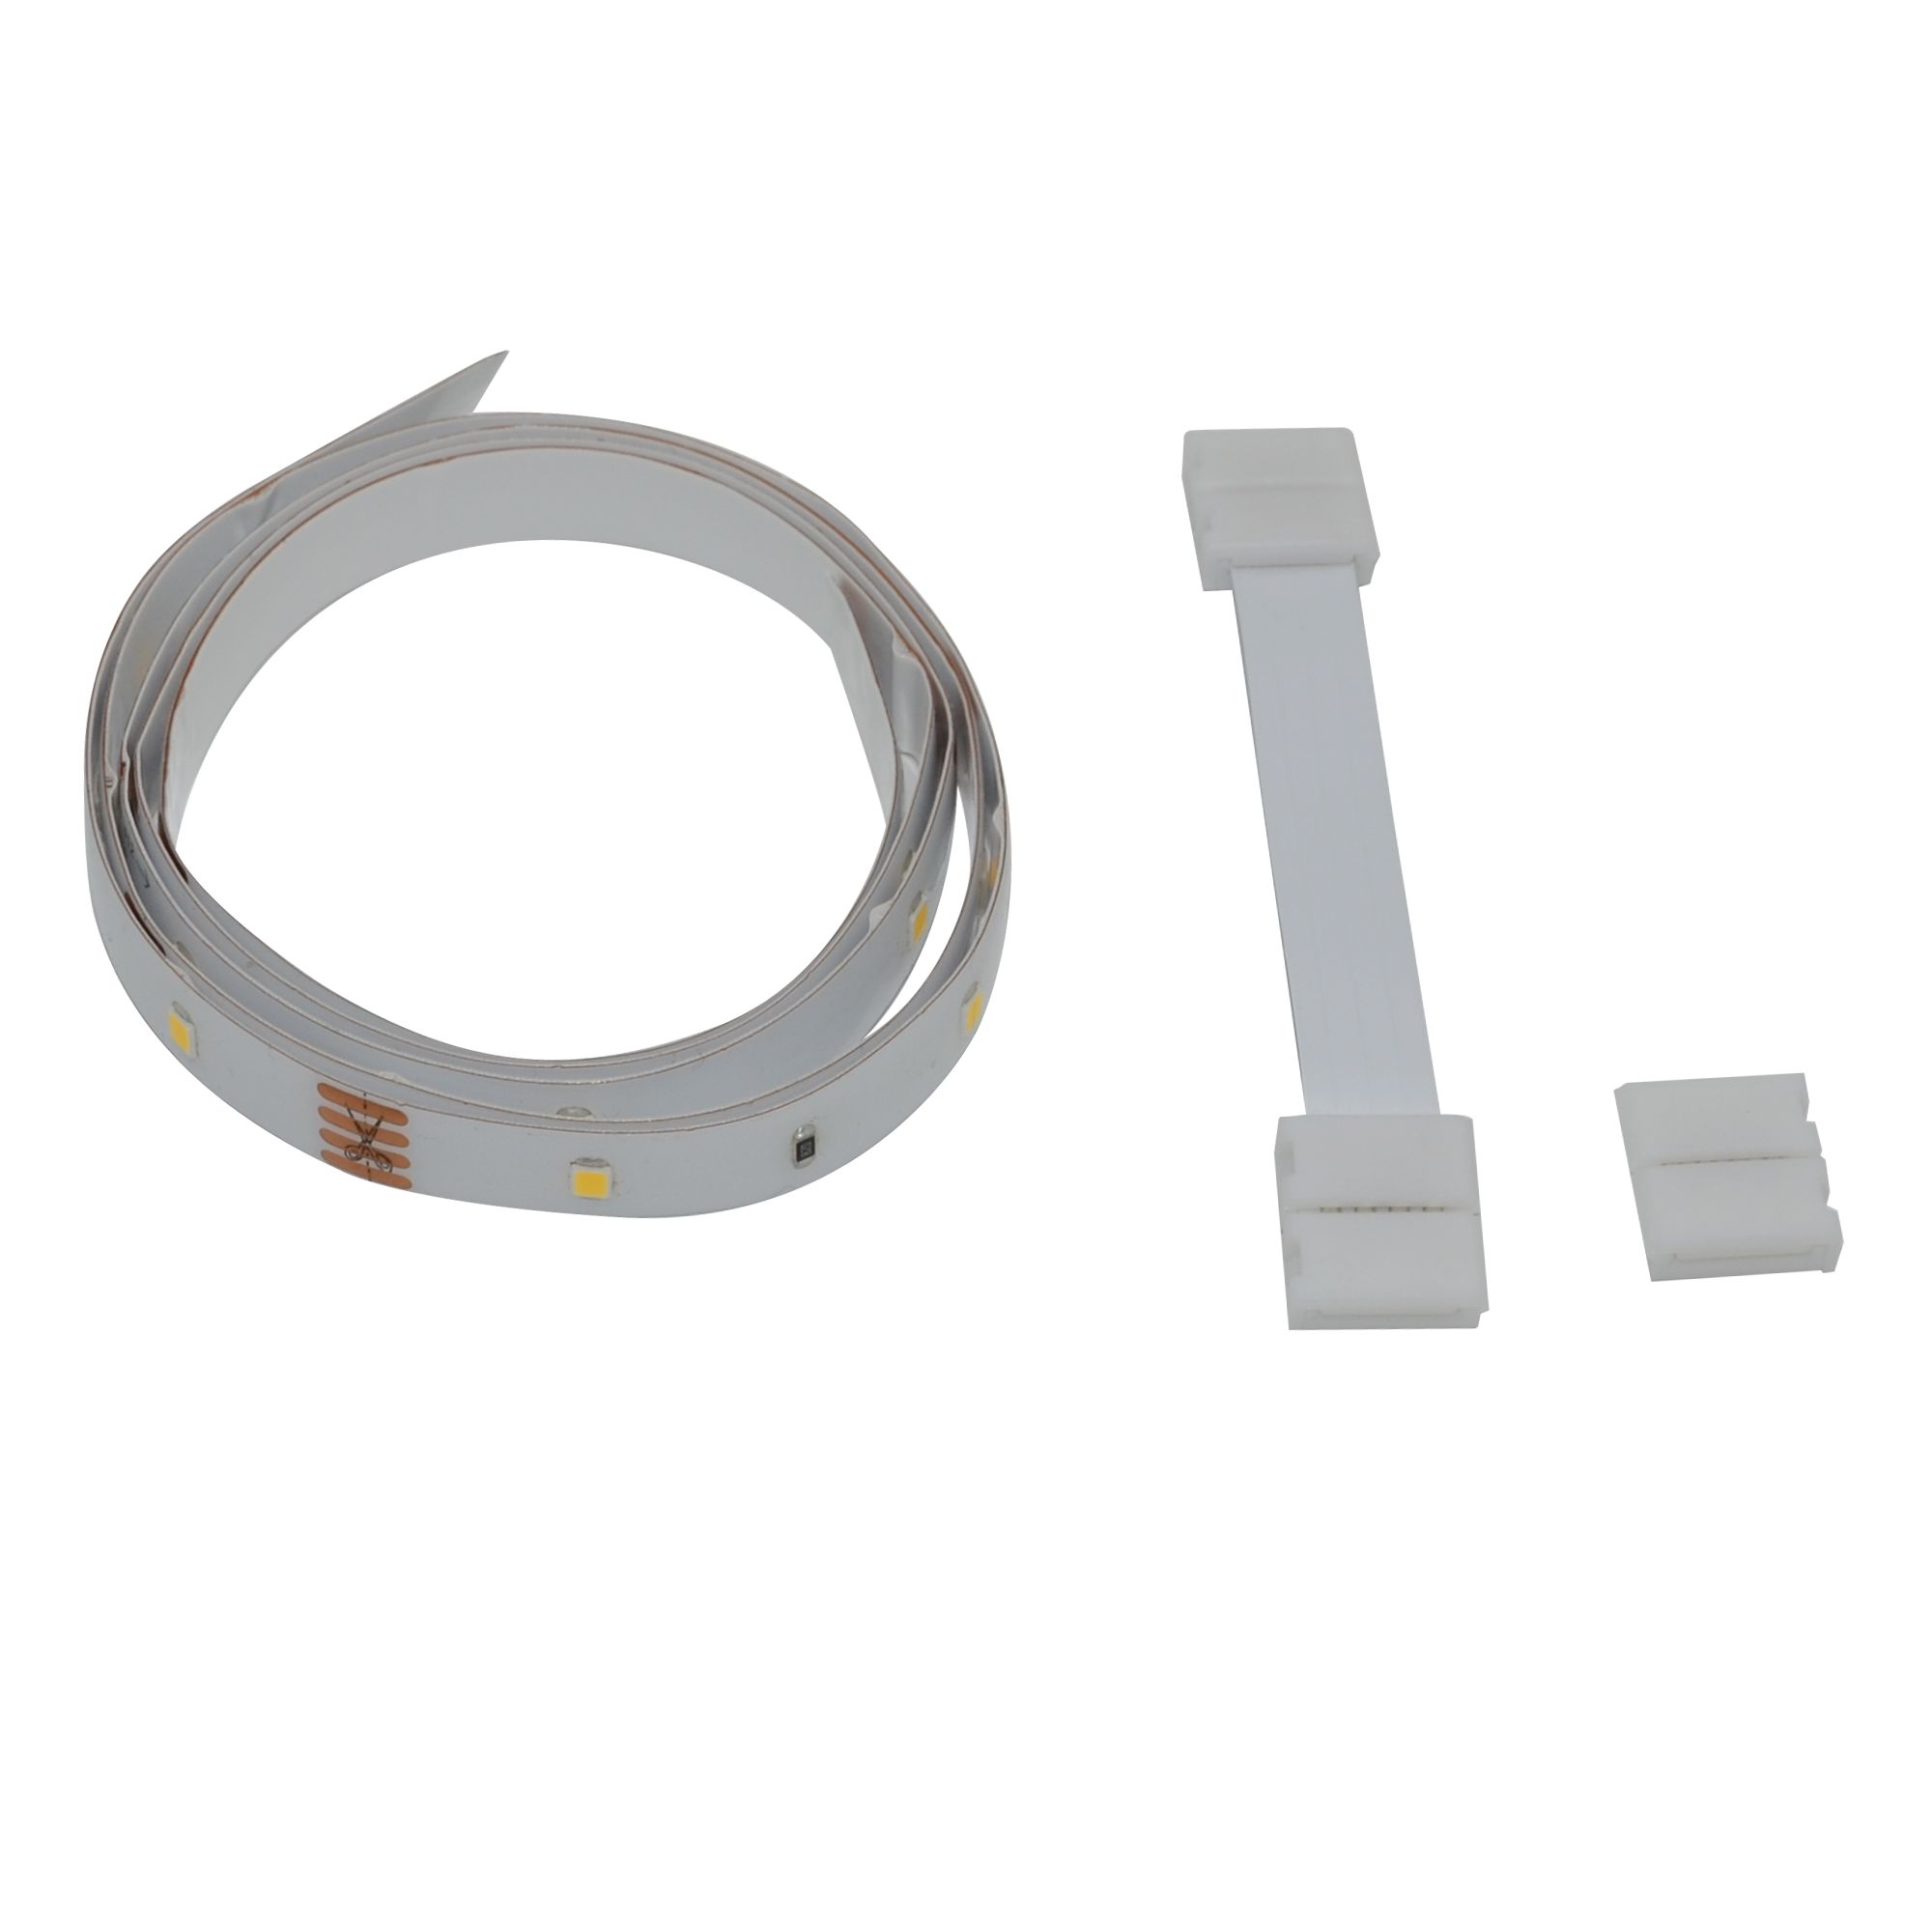 GoodHome Mains-powered (plug-in) LED Neutral white Strip light IP20 400lm (L)1m